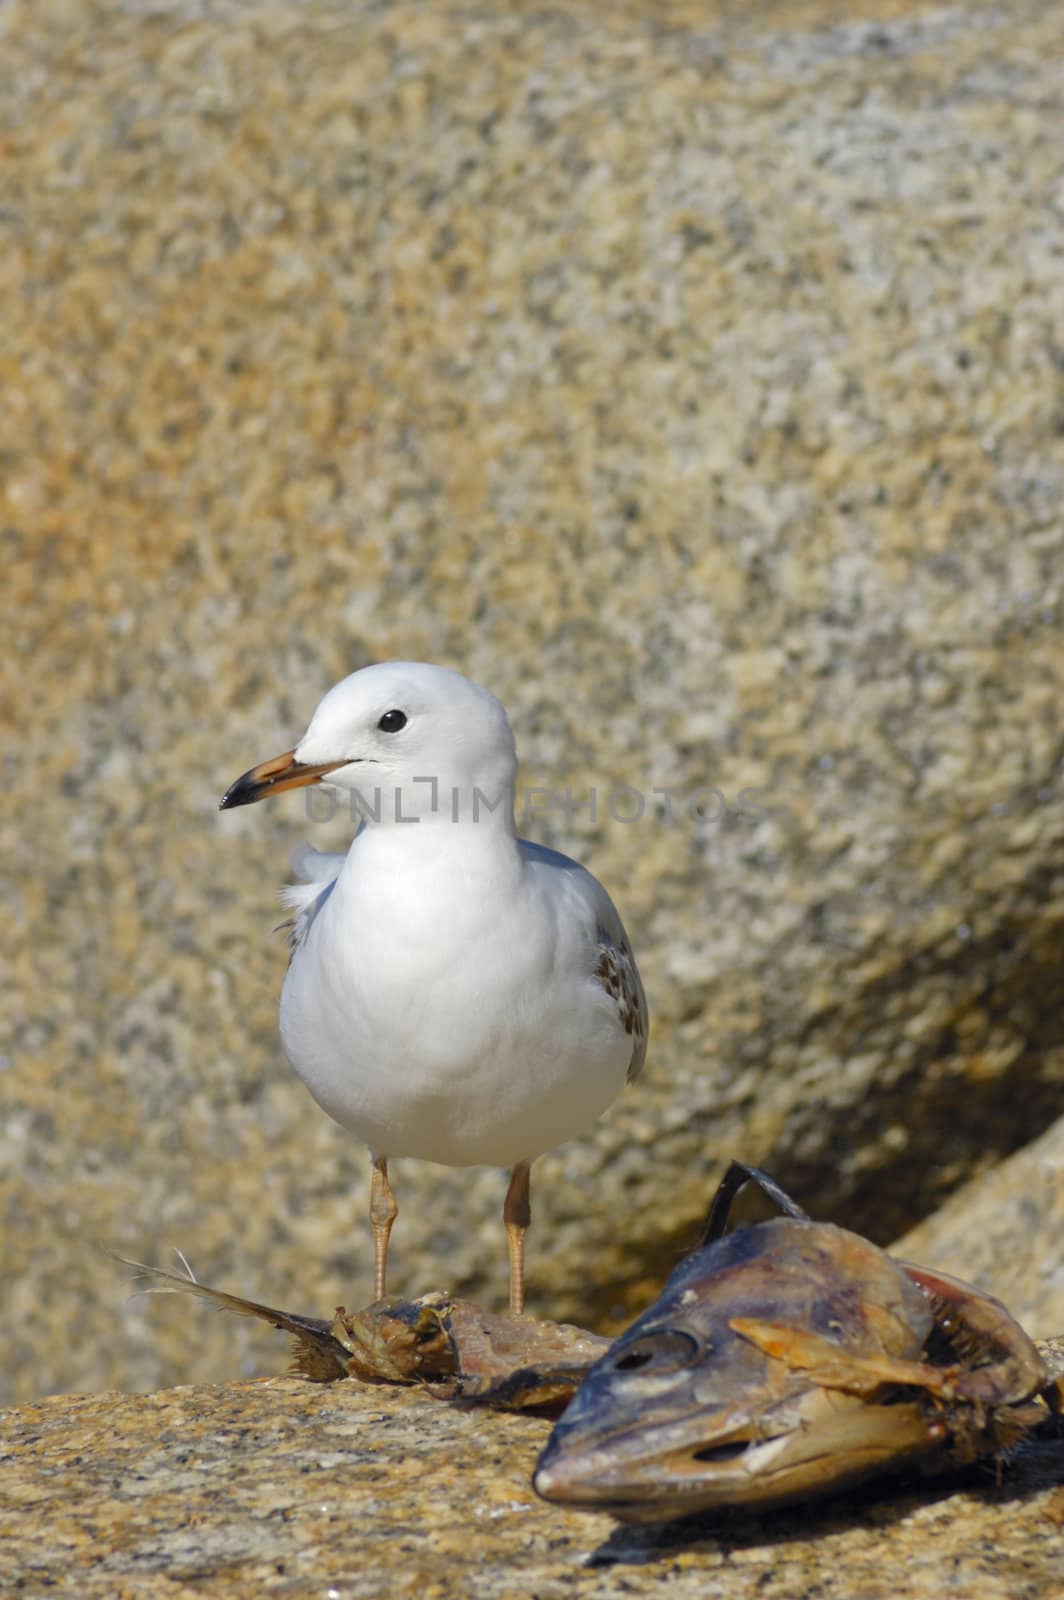 A juvenile Silver Gull (Larus novaehollandiae) about to feed from the carcass of a dead fish. Space for copy above its head.